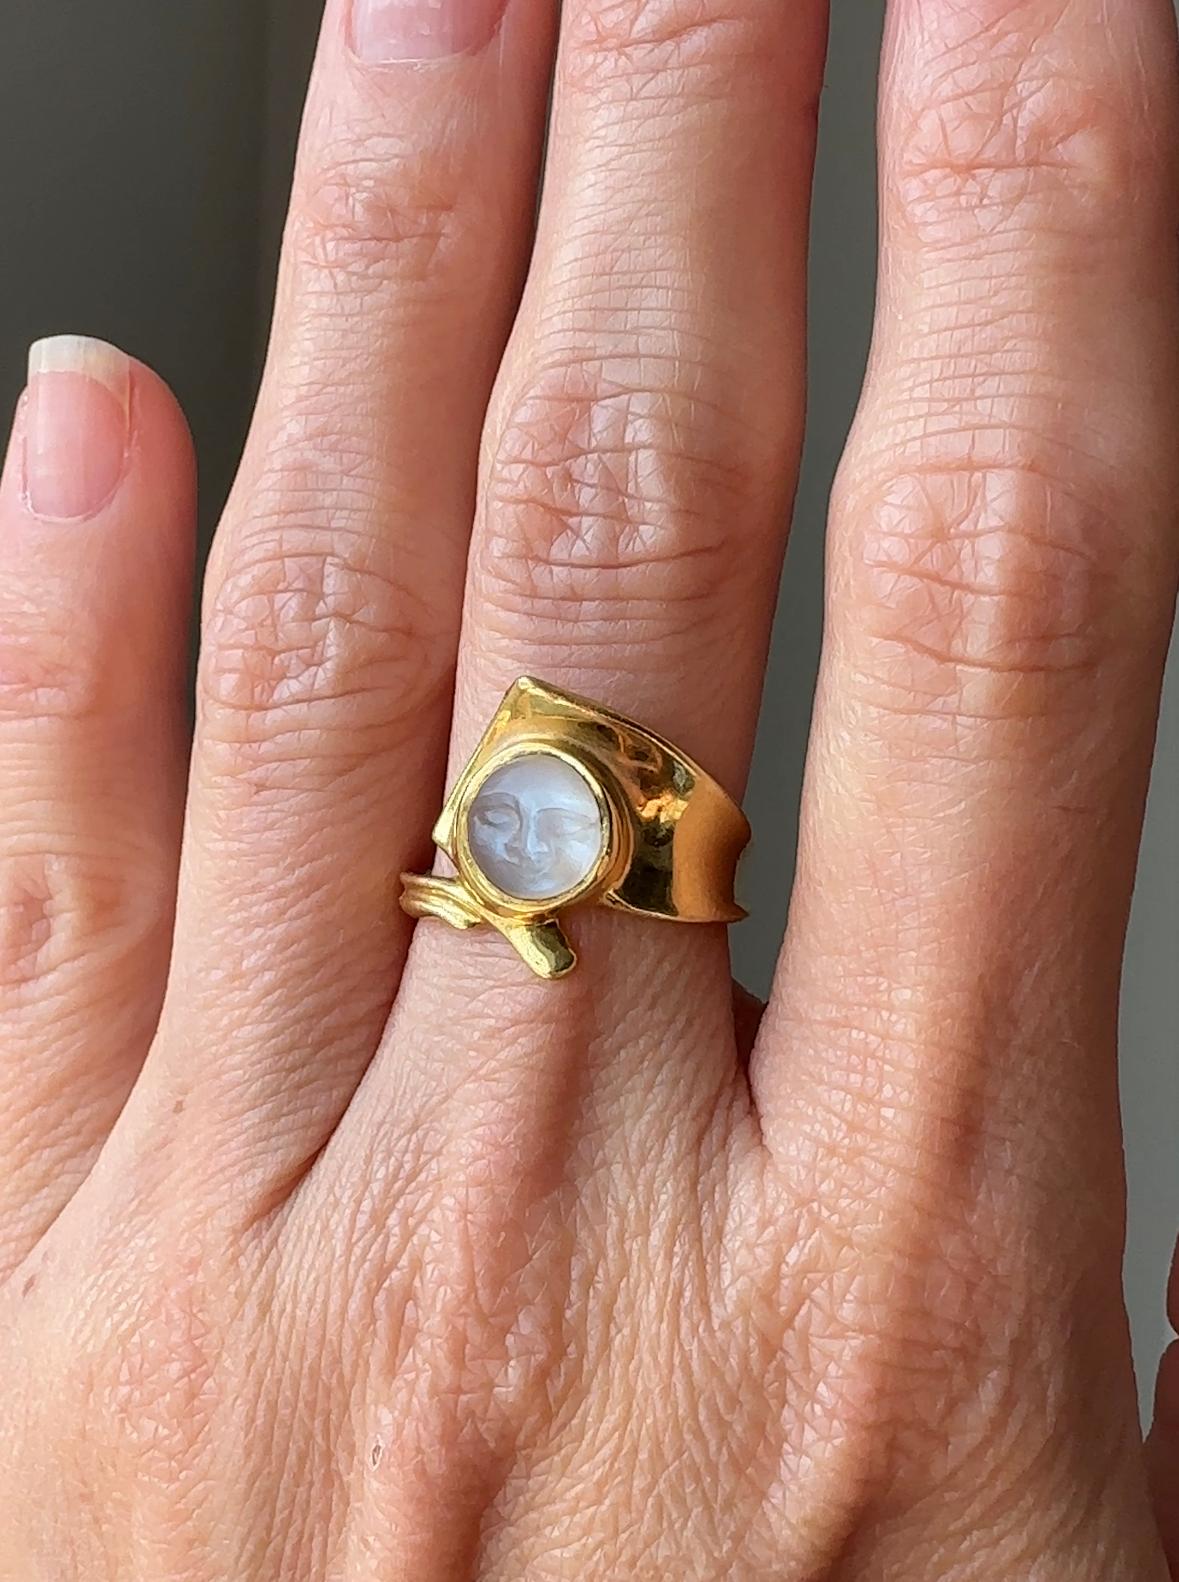 Both luminous and beautifully carved this whimsical vintage man-in-the-moon ring is something special. 🌙 The hand carved Ceylon moonstone is transparent with a magical blue luster mounted in a bespoke 18k yellow gold setting crafted by Skylight